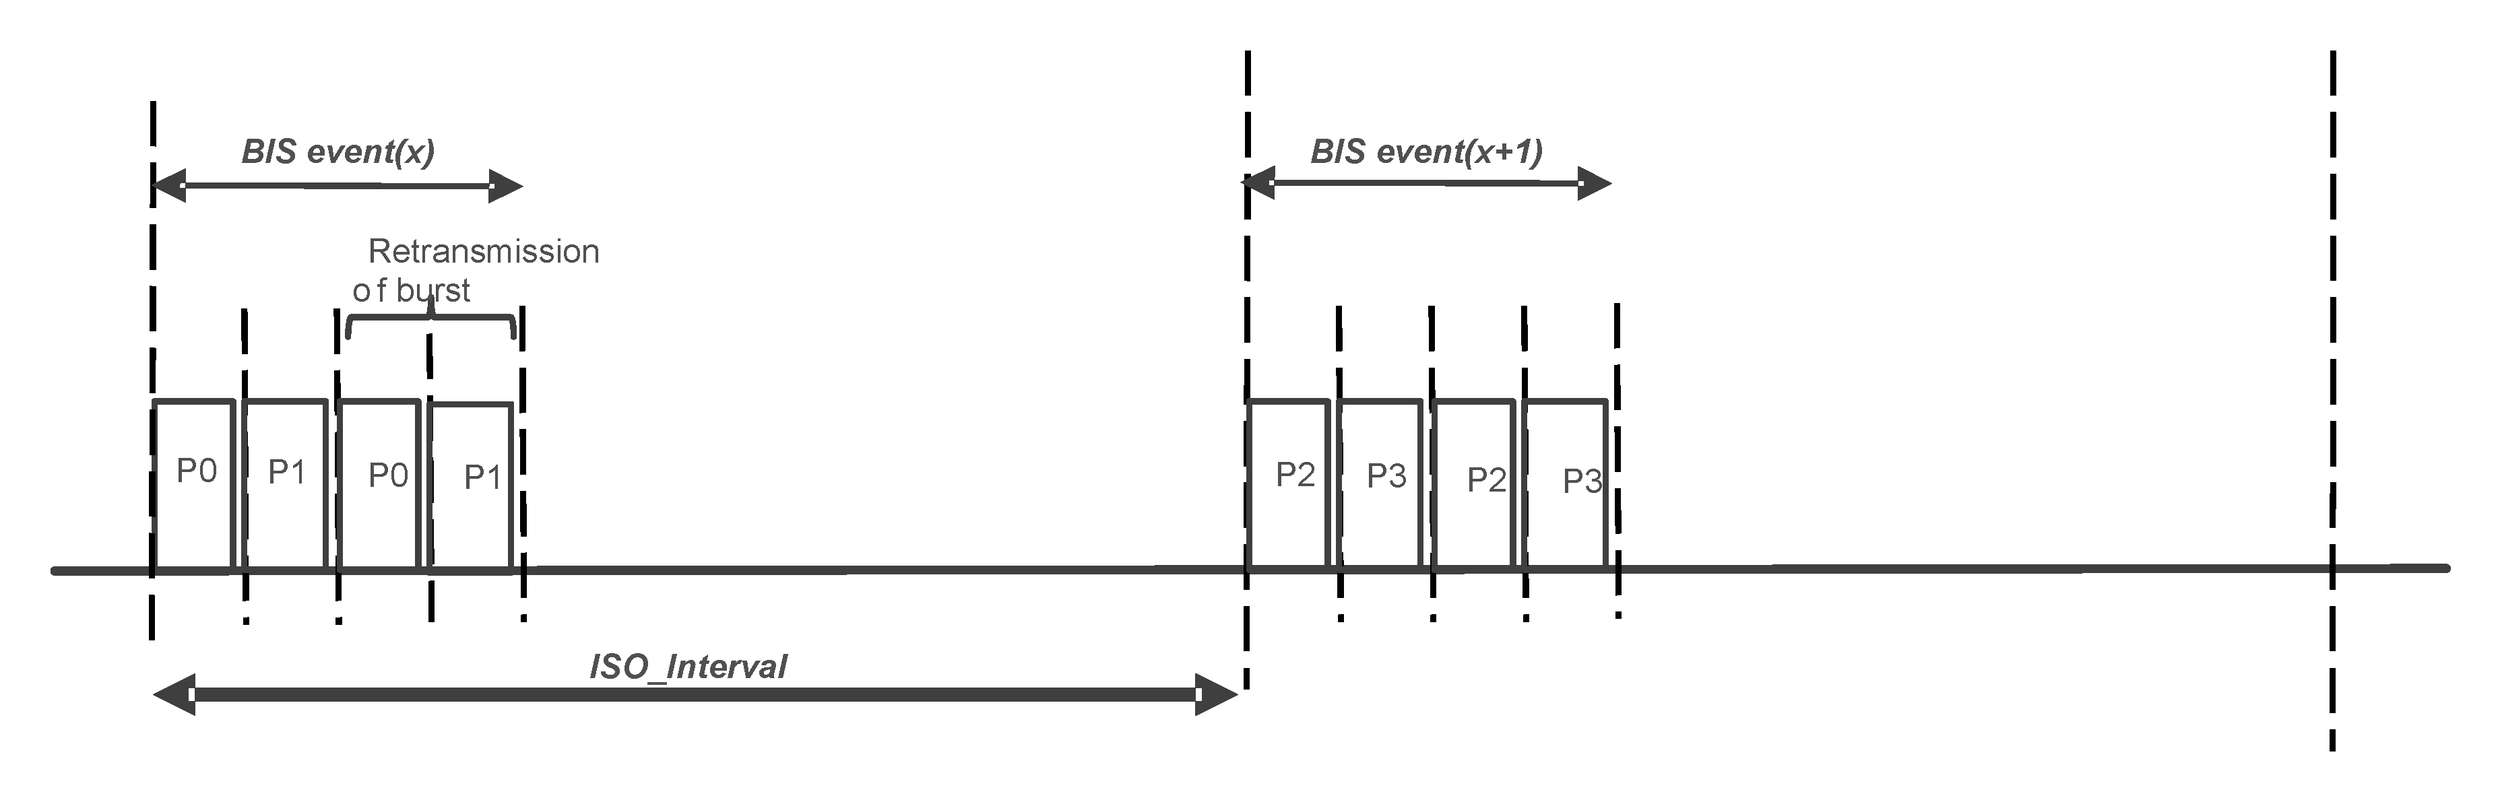 Allocations of payloads within a BIS with BN = 2, IRC = 2, PTO = 0, and NSE = 4